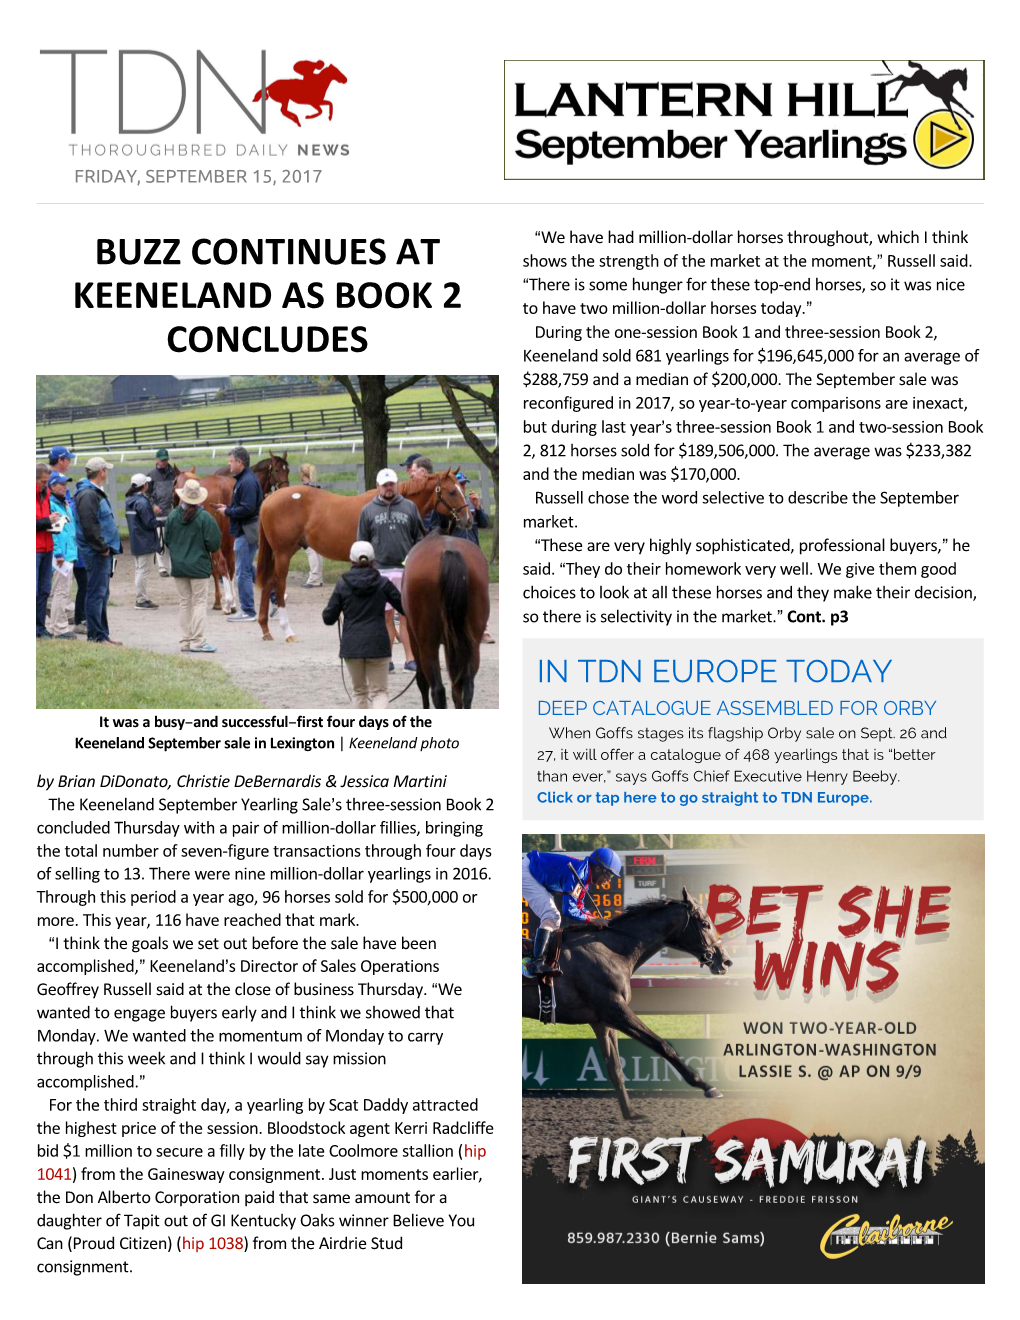 Buzz Continues at Keeneland As Book 2 Concludes